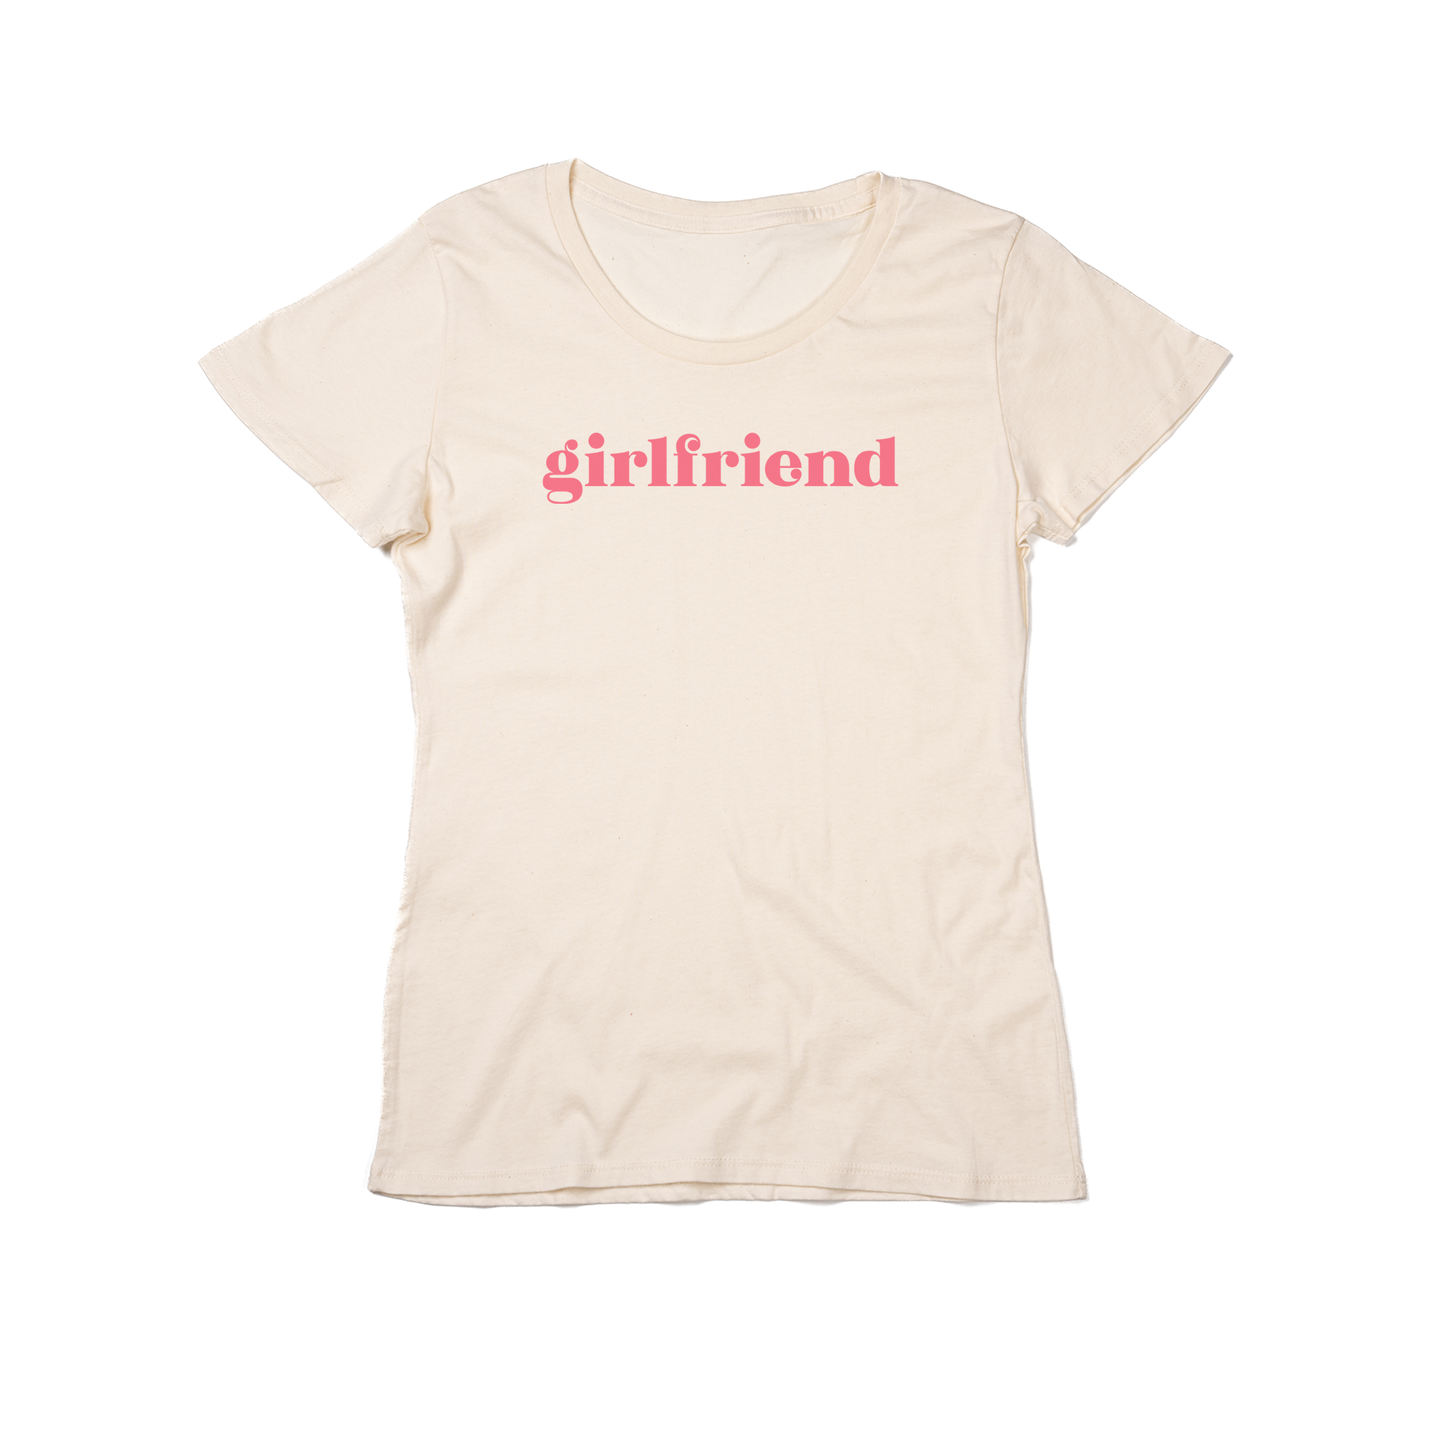 Girlfriend - Women's Fitted Tee (Natural)